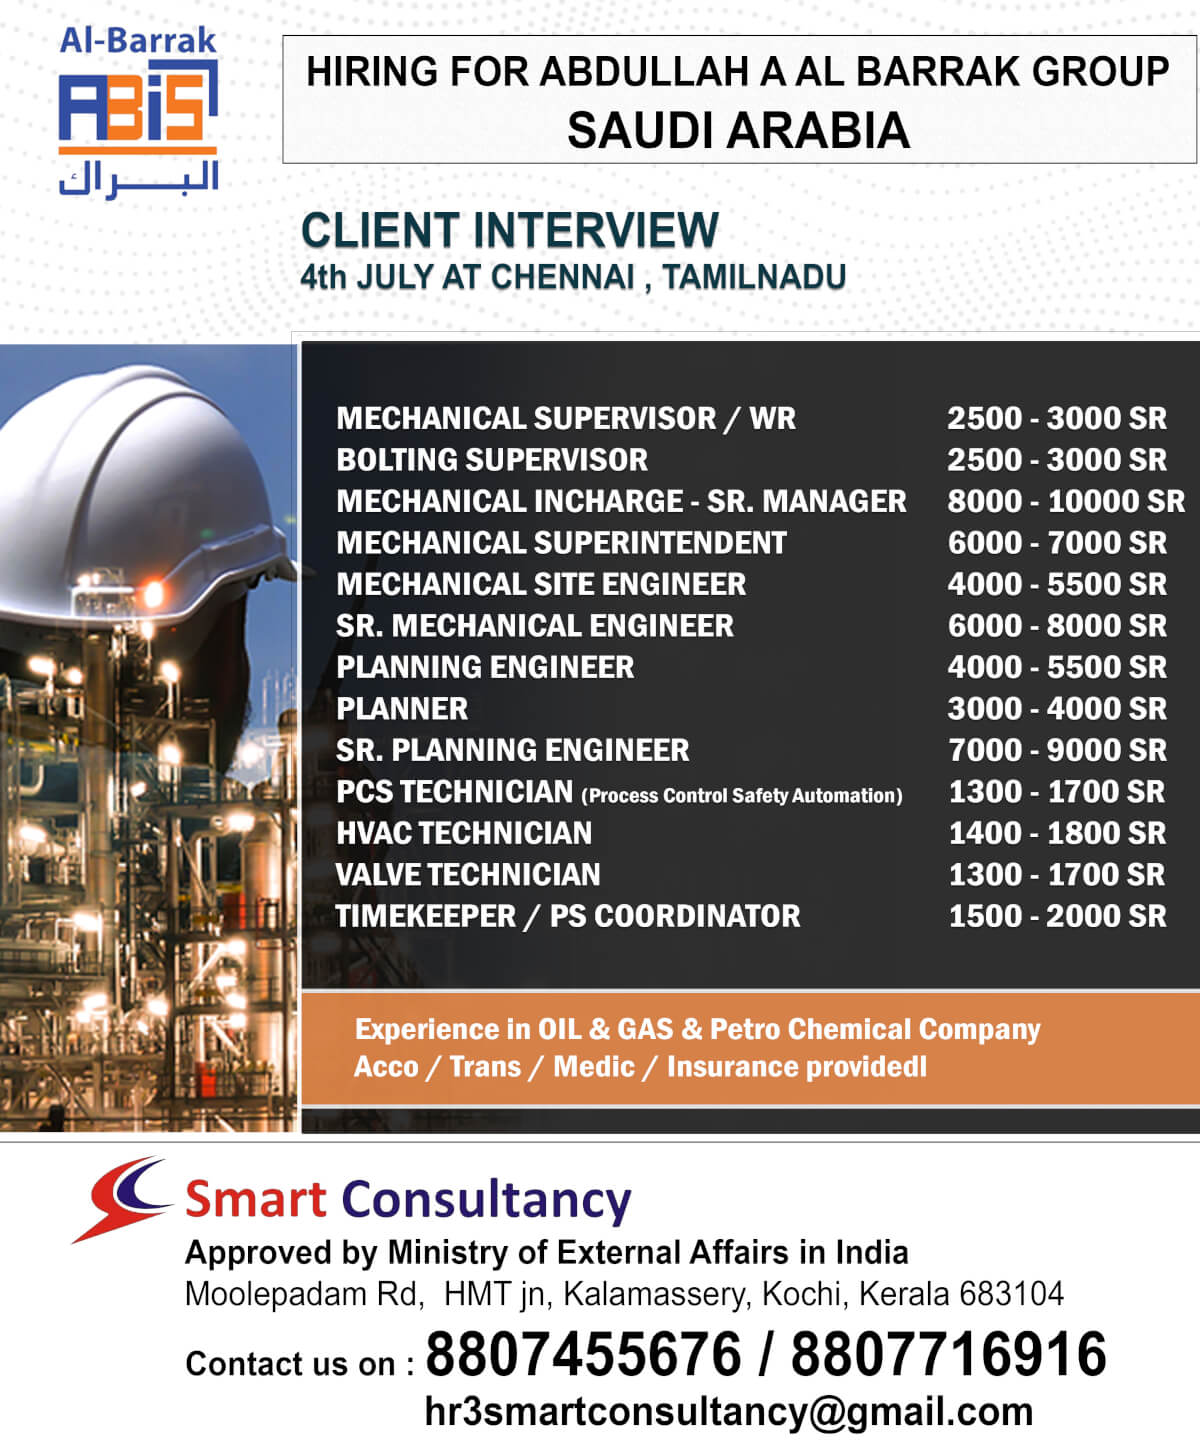 Direct Client Interview on 4th July at Chennai, Tamilnadu. Contact us on : 8807455676 / 8807716916 email: hr3smartconsultancy@gmail.com